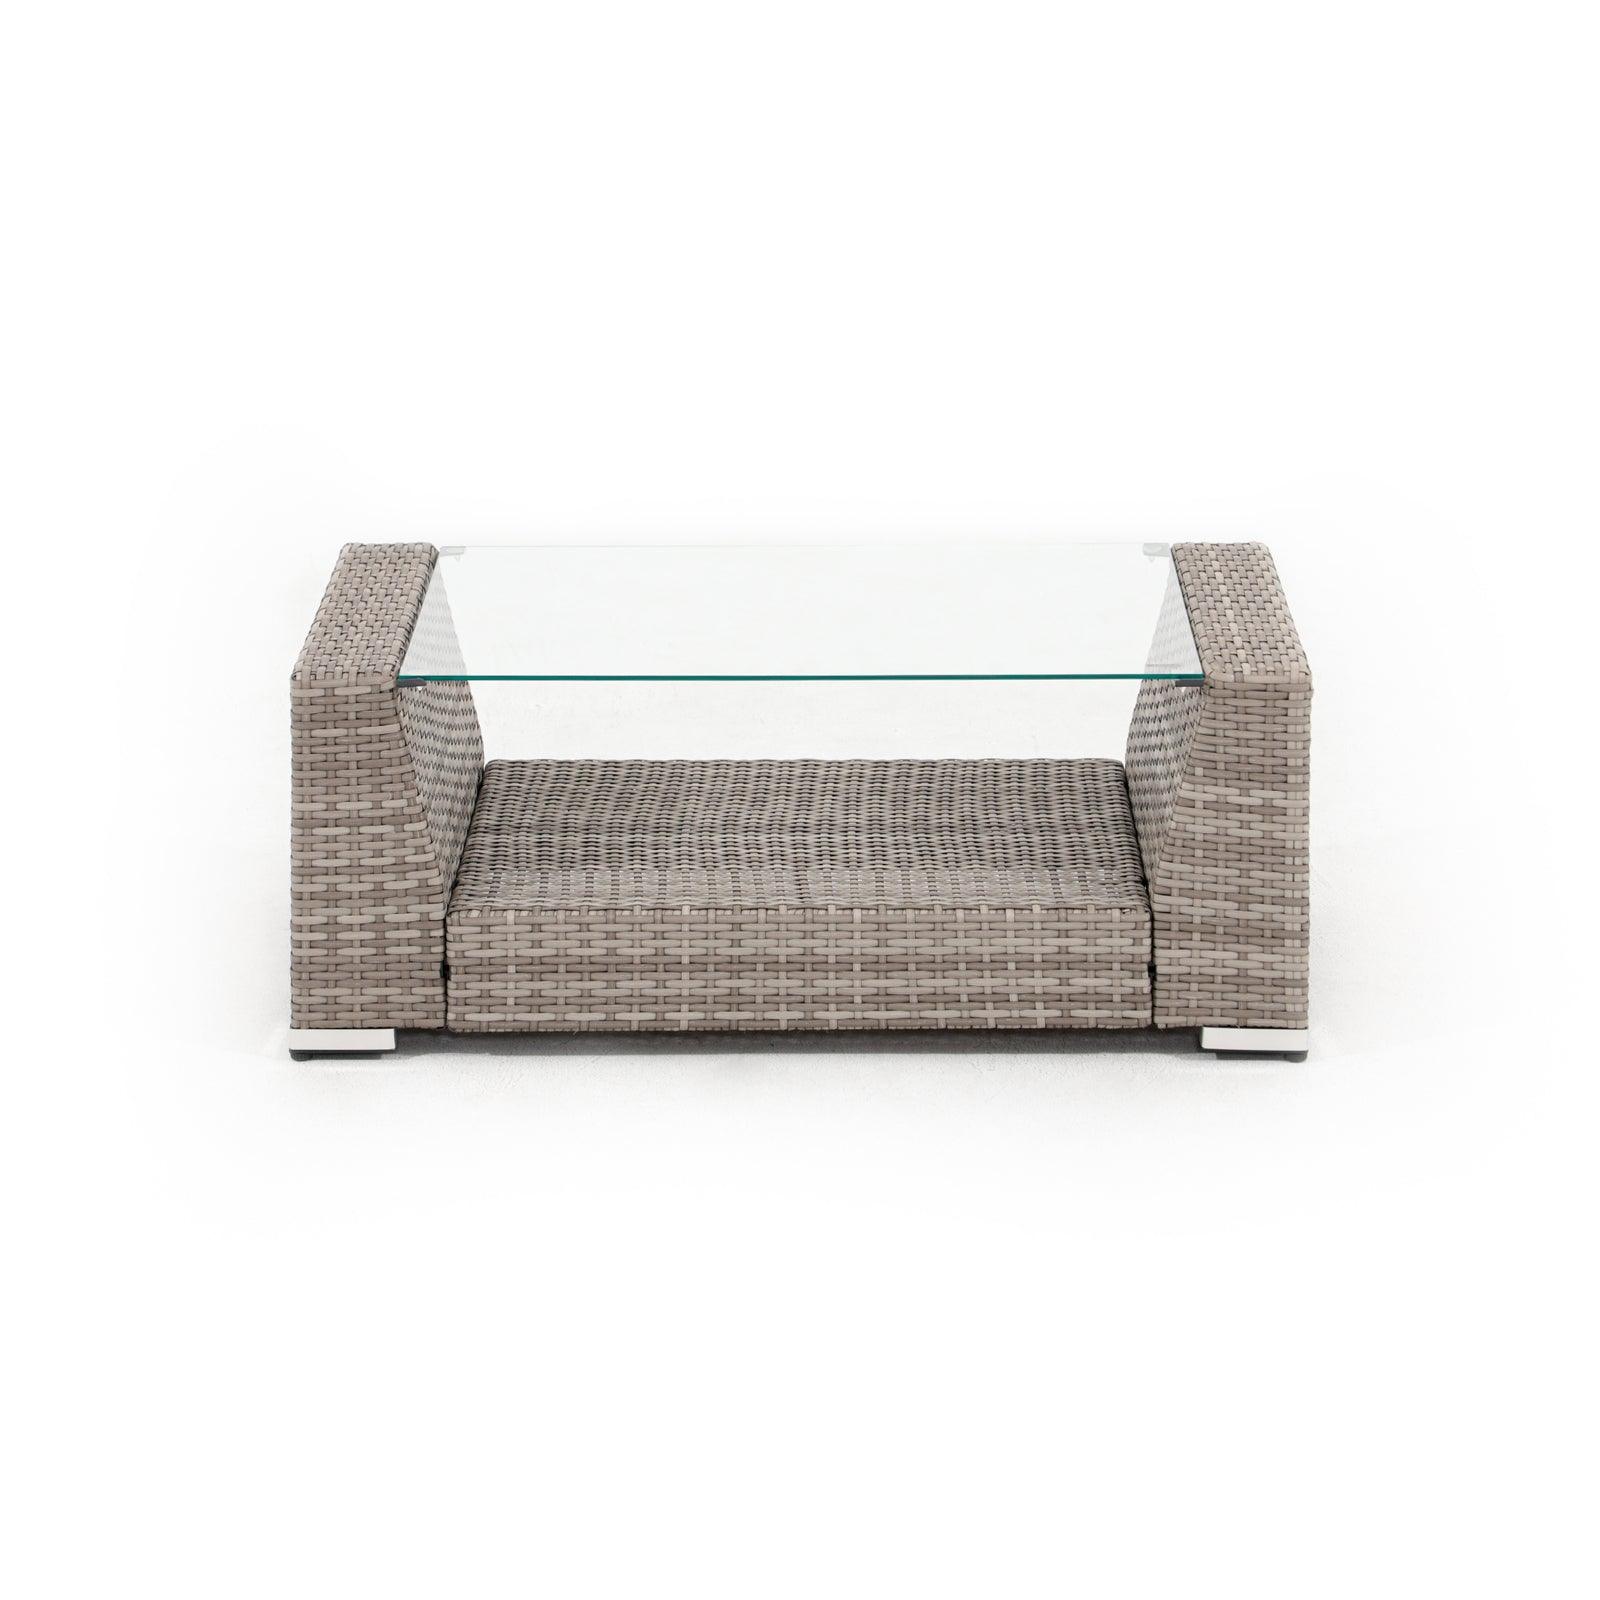 Elba grey rattan u-shaped outdoor coffee table with glass tabletop, front view- Jardina Furniture